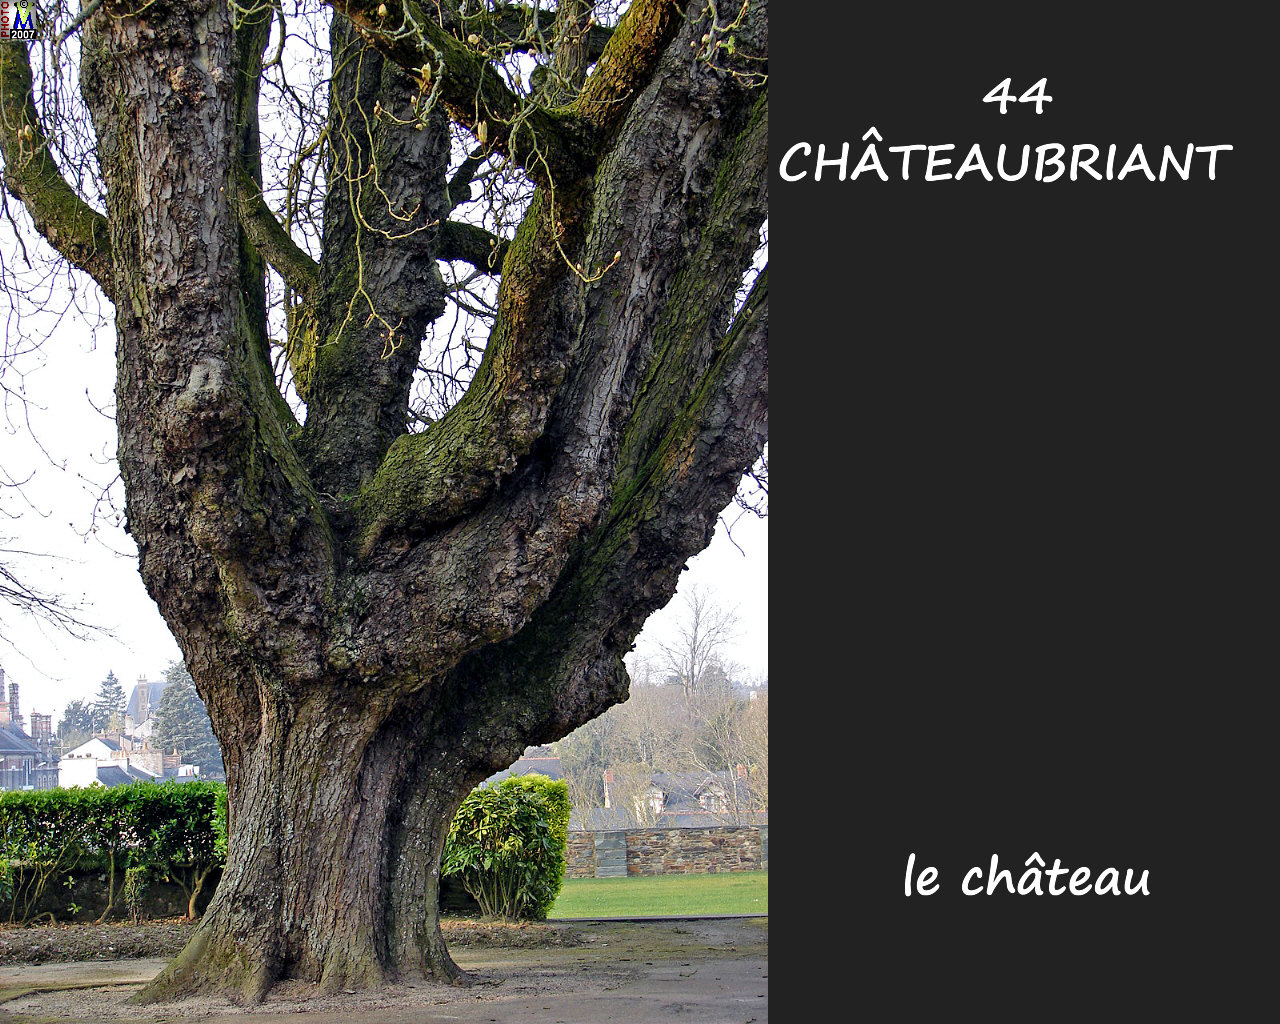 44CHATEAUBRIANT_chateau_248.jpg